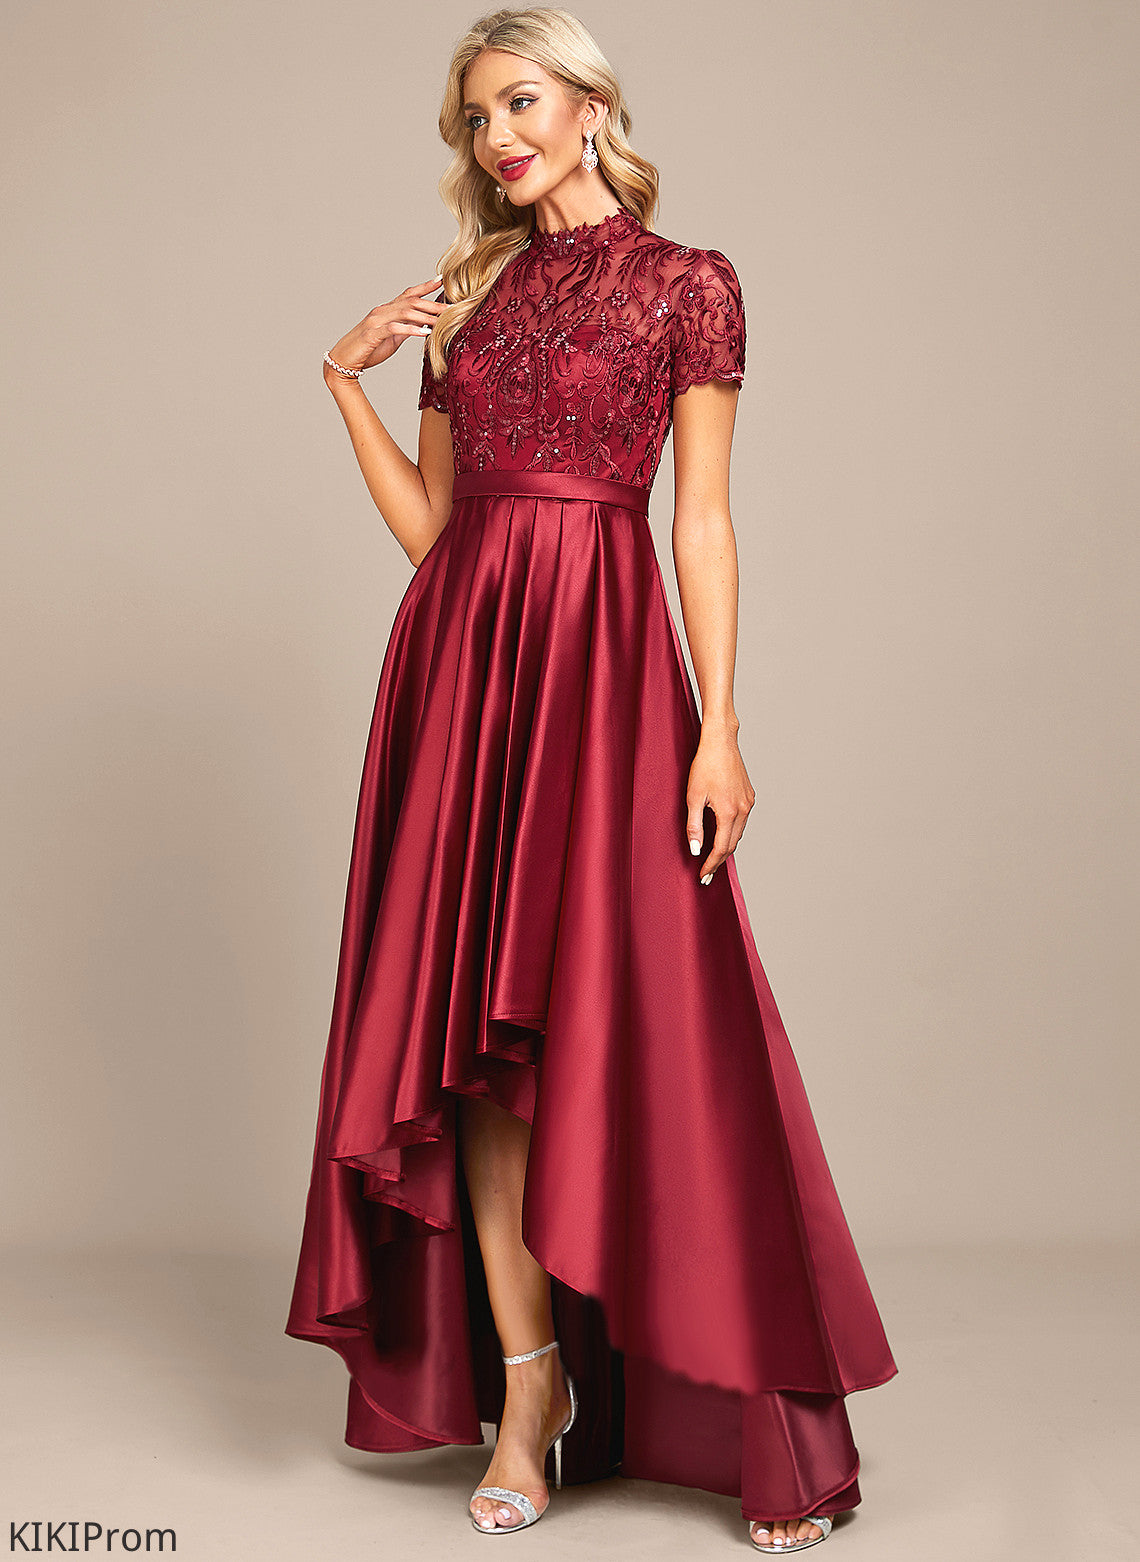 Satin A-Line Lace Cocktail Dresses Dress With Cocktail Sequins Ruffle Asymmetrical Maeve High Neck